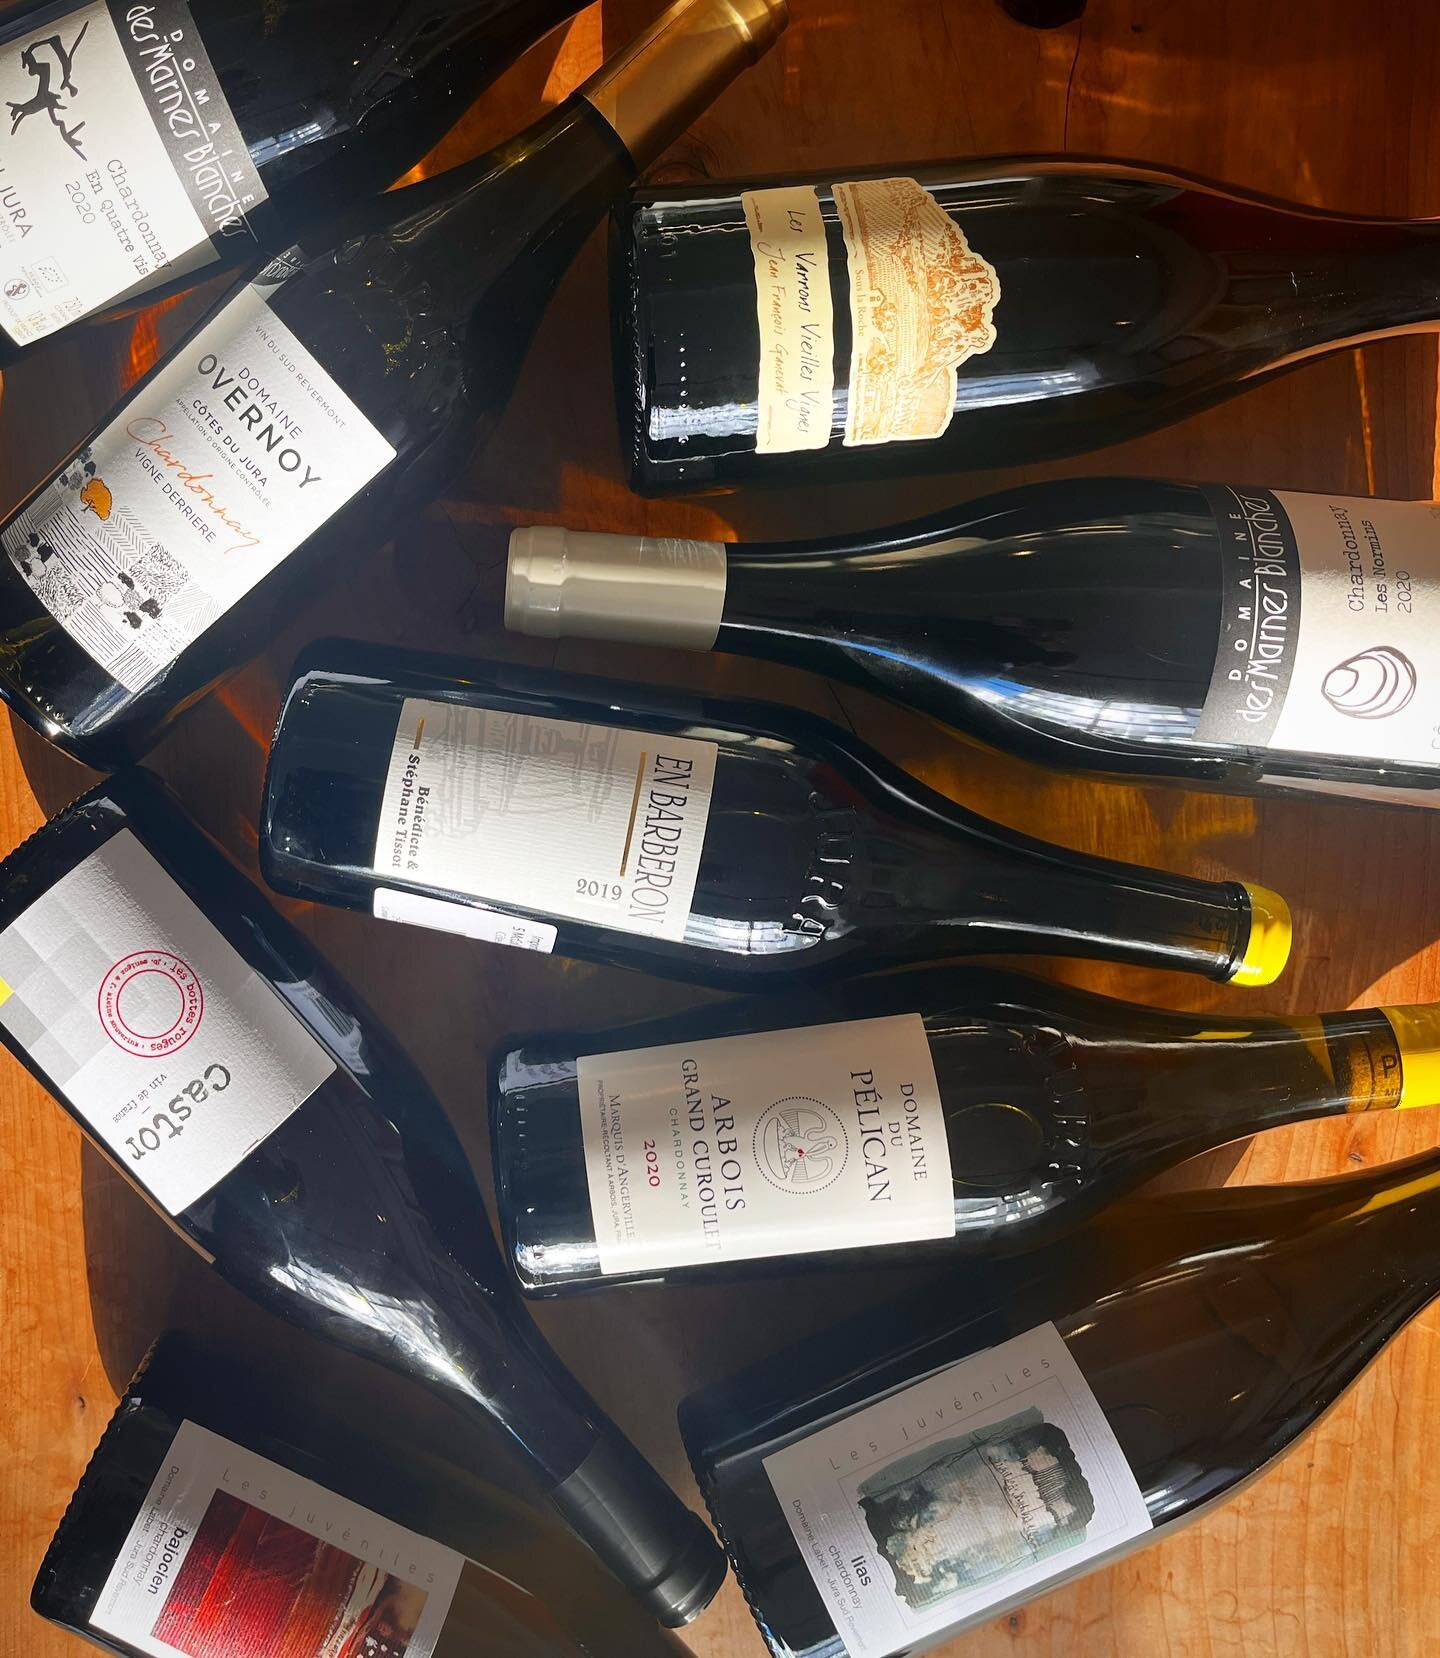 The Jura, as a wine region, is persistently introduced to drinkers by way of winemaking. Traditional techniques, specifically that of employing extended &eacute;levage without topping up barrels for white wines, have shrouded the region in a certain 